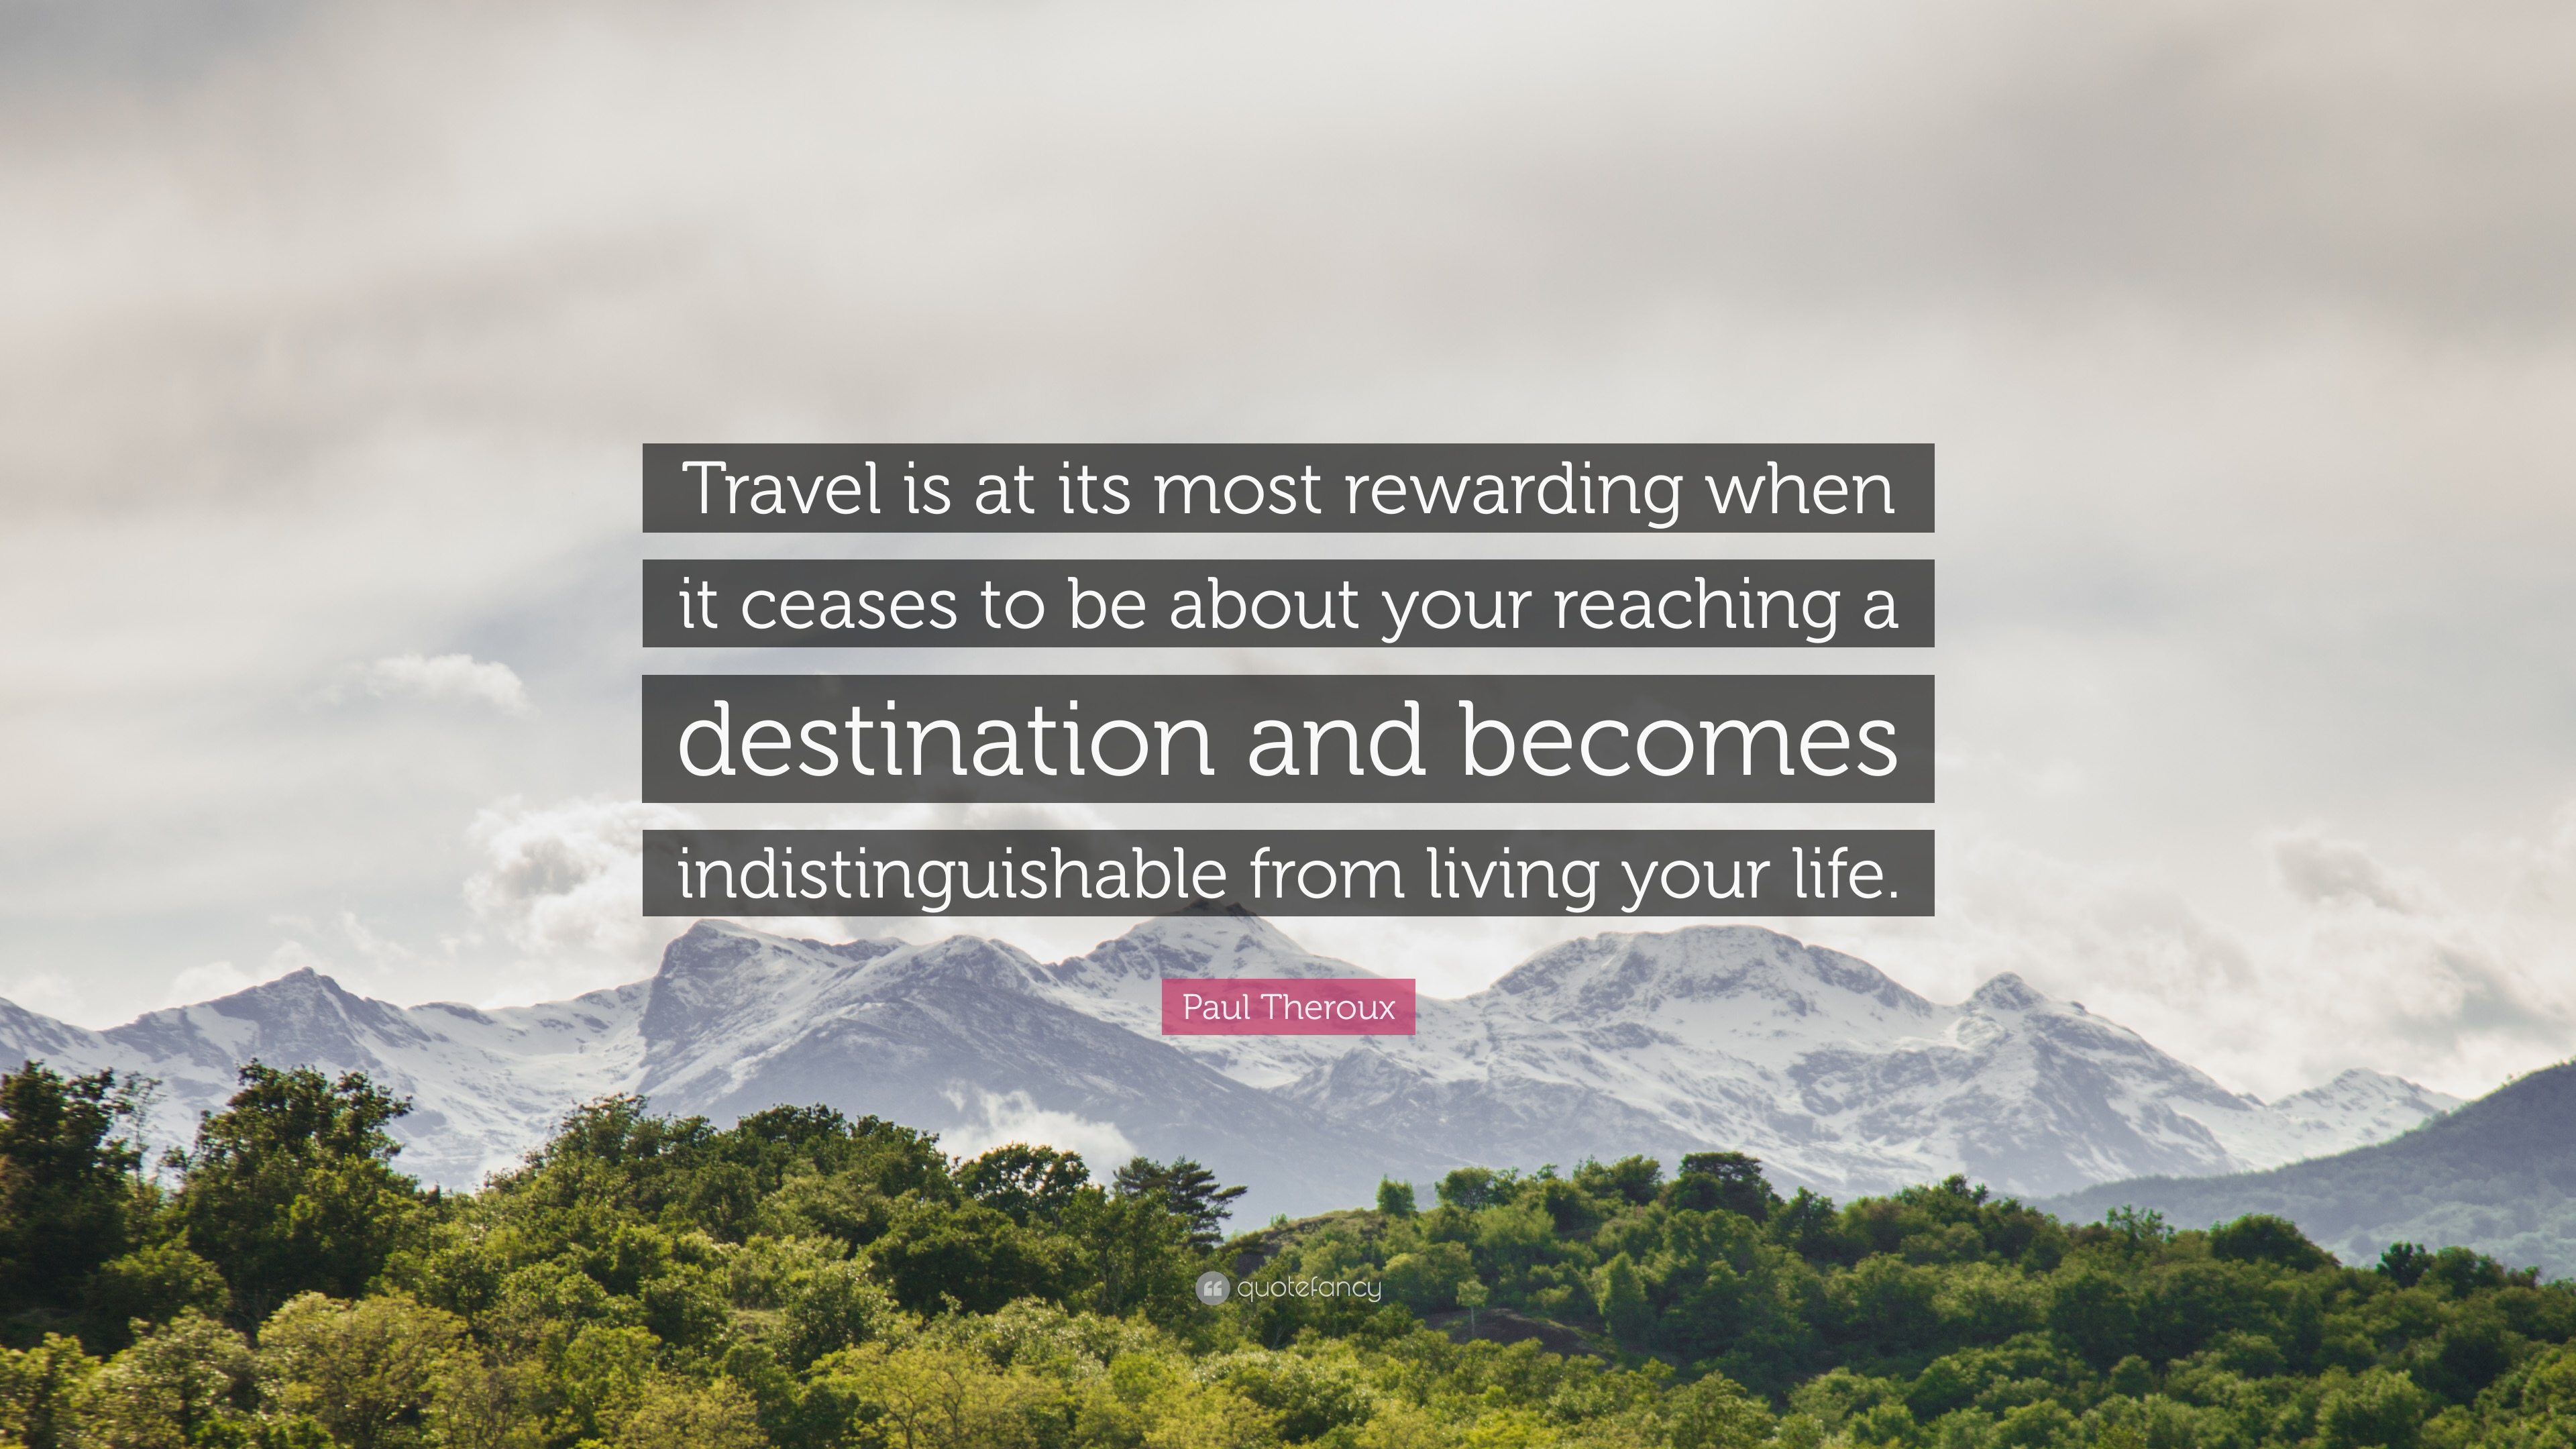 Paul Theroux Quote: “Travel is at its most rewarding when it ceases ...